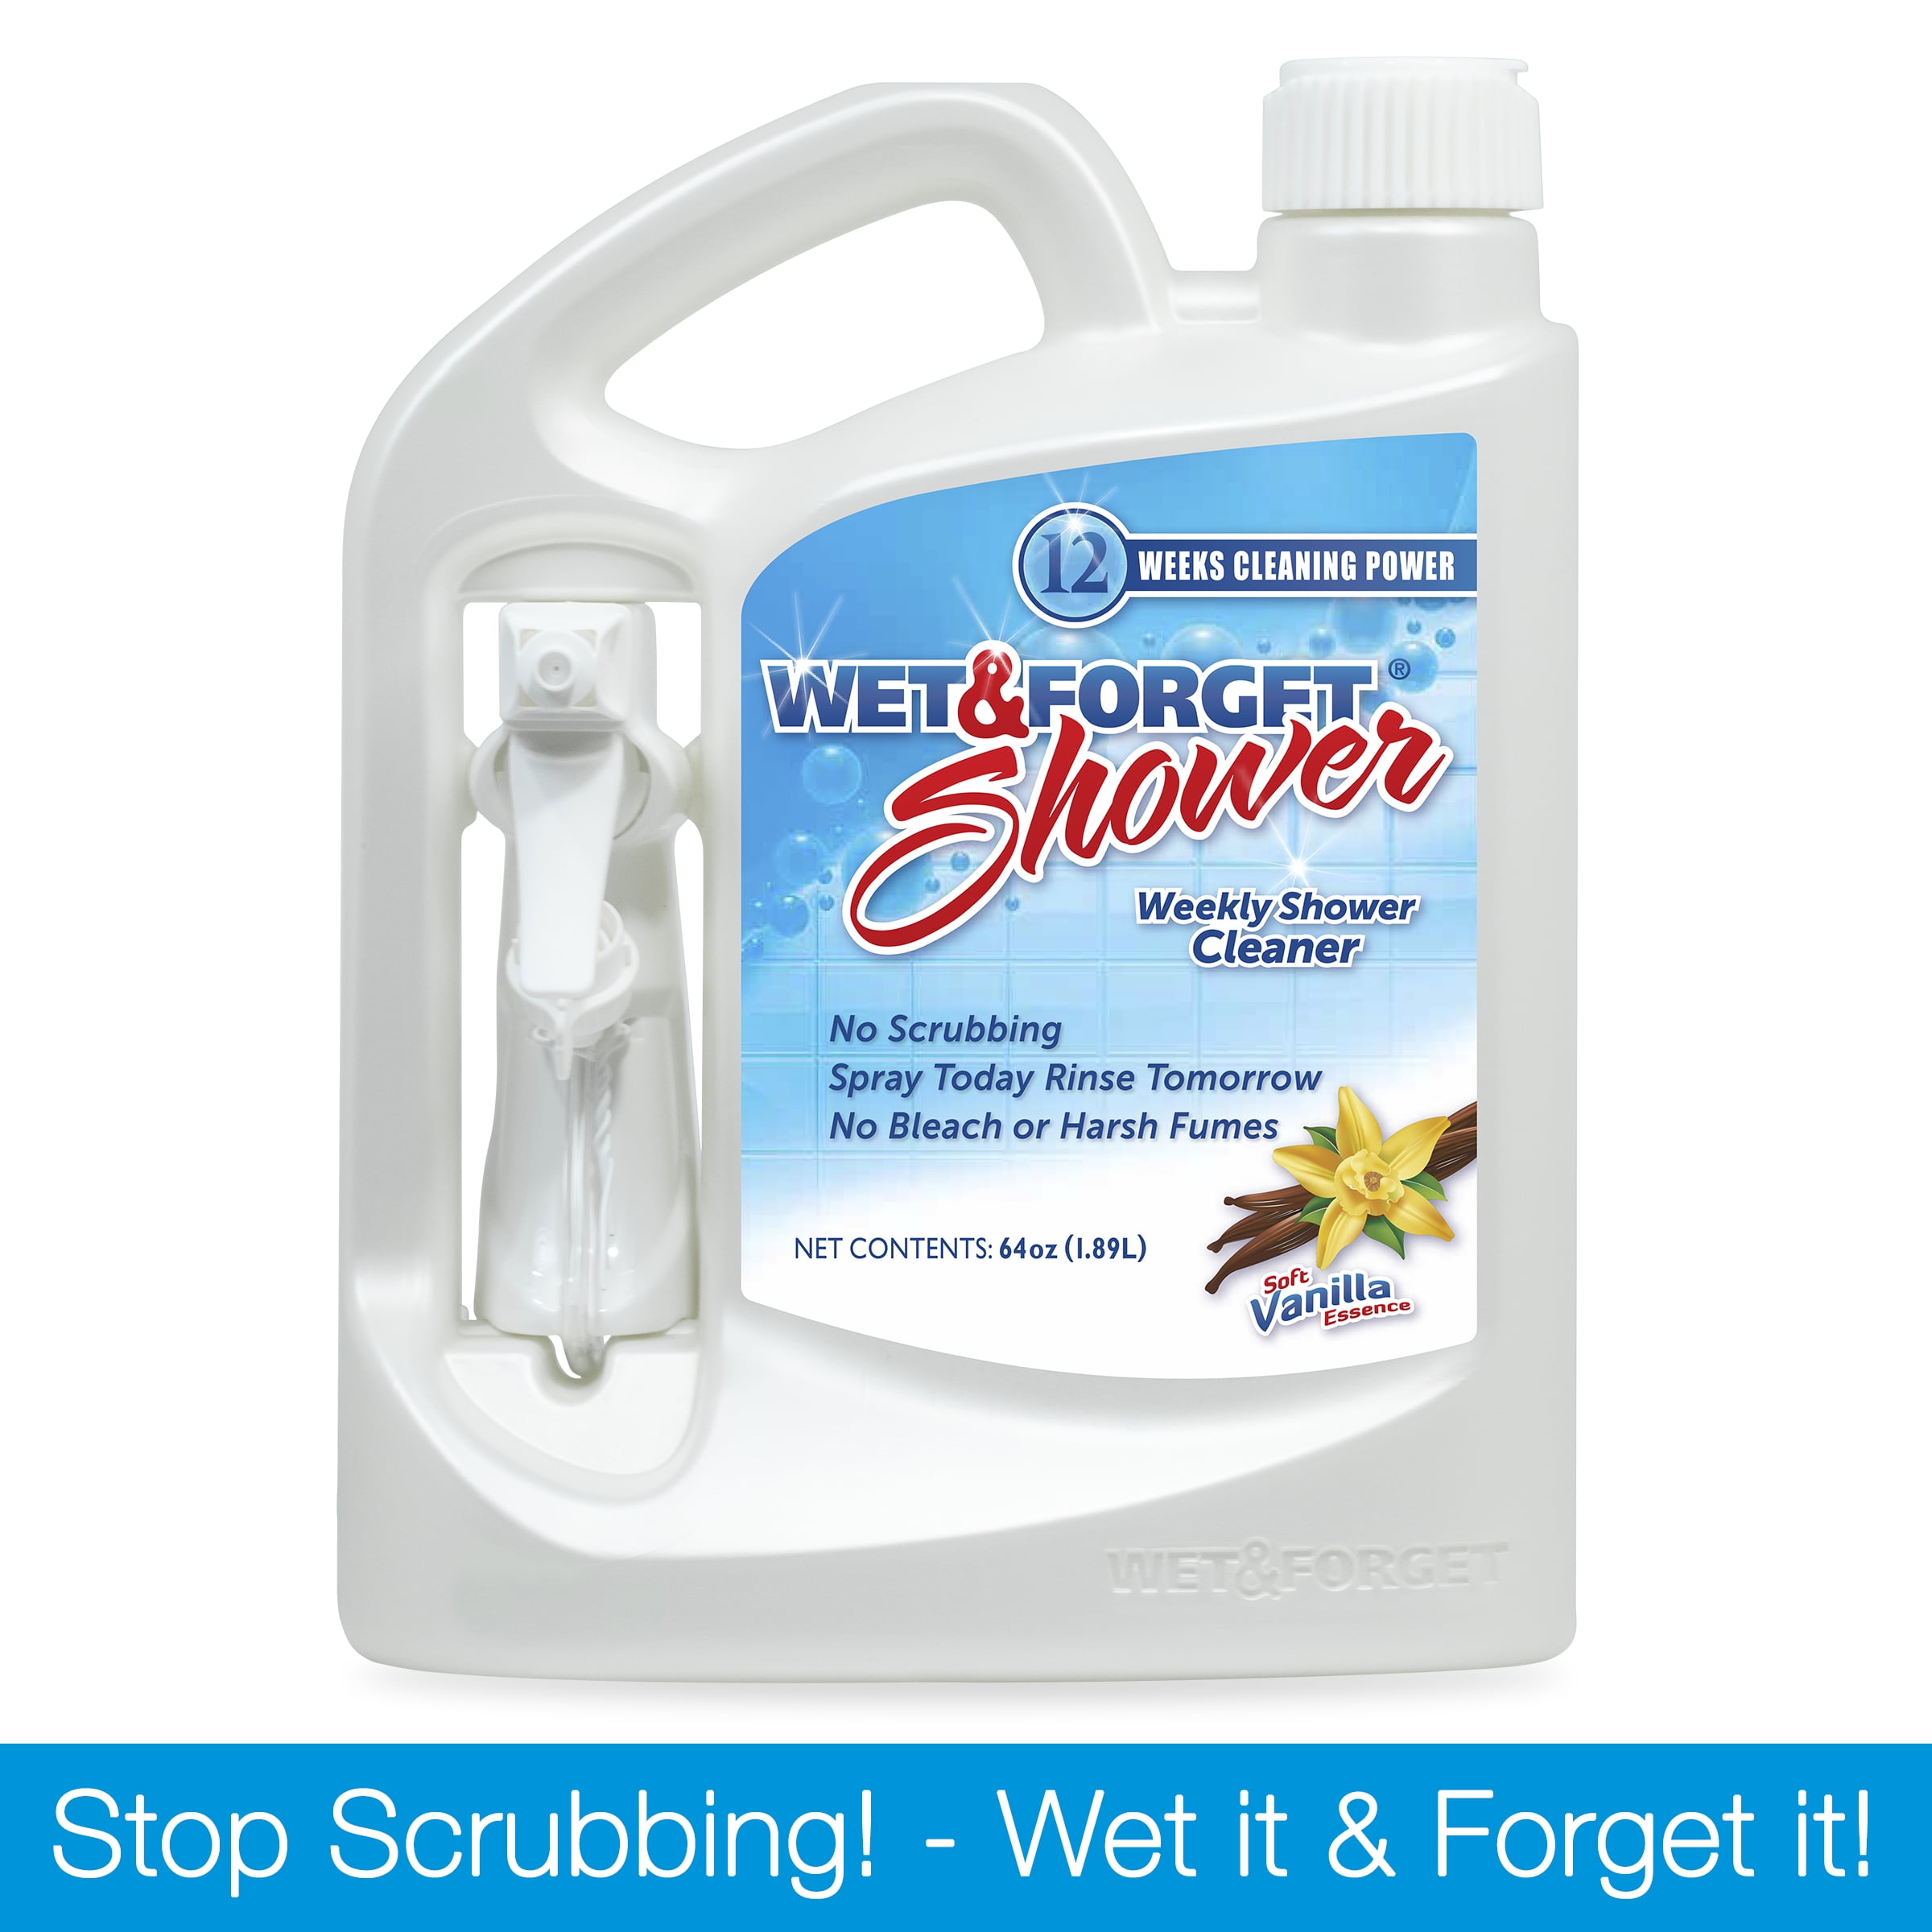 Scrubbing Bubbles® Automatic Shower Cleaner Starter Kit 34 fl oz. Box, Cleaning